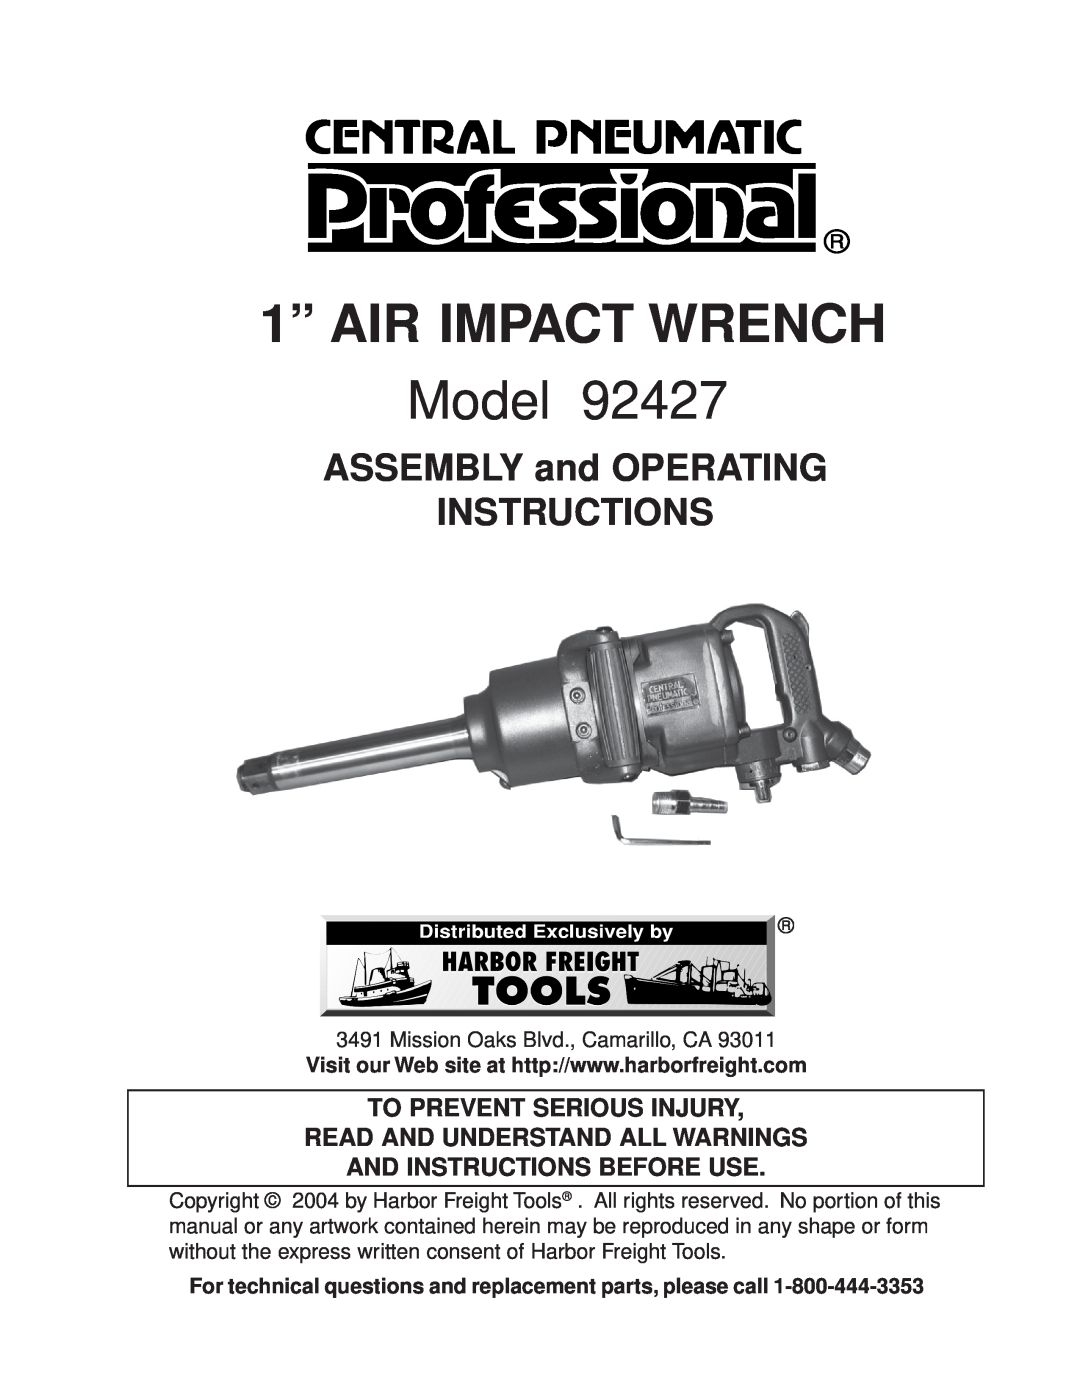 Harbor Freight Tools 92427 operating instructions To Prevent Serious Injury Read And Understand All Warnings, Model 